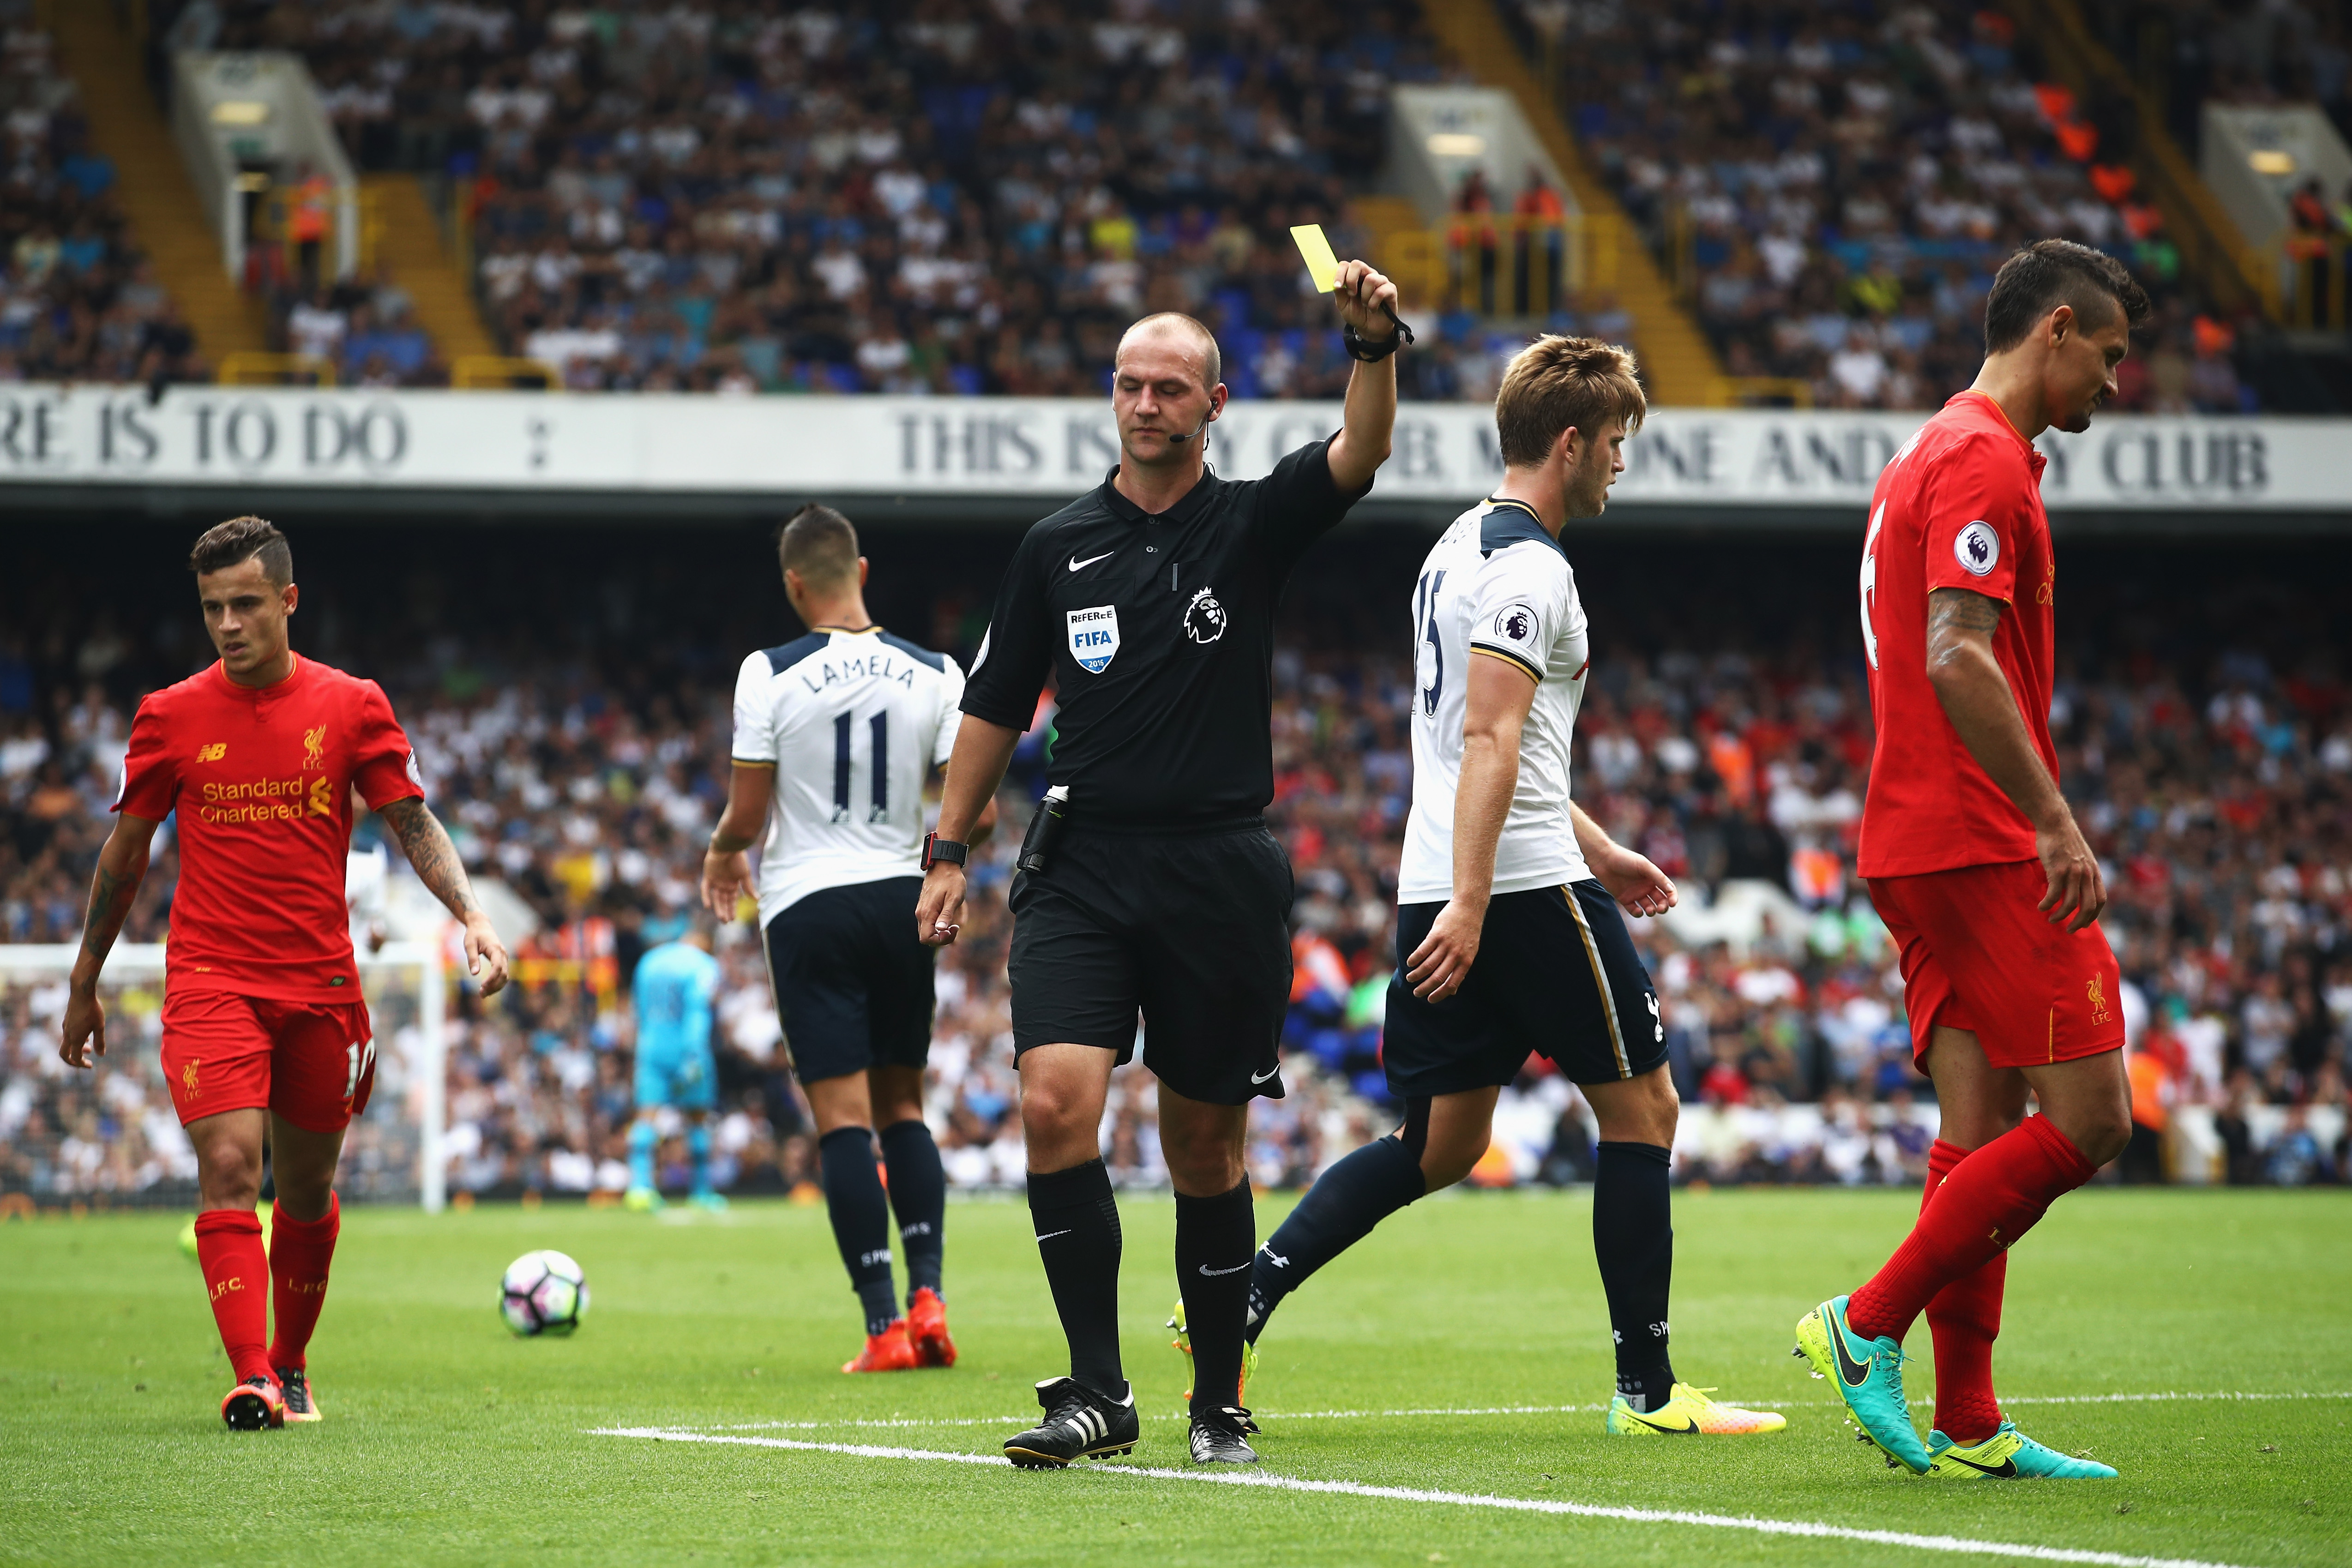 LONDON, ENGLAND - AUGUST 27: Referee Booby Madley pulls a yellow card out of his pocket during the Premier League match between Tottenham Hotspur and Liverpool at White Hart Lane on August 27, 2016 in London, England.  (Photo by Julian Finney/Getty Images)